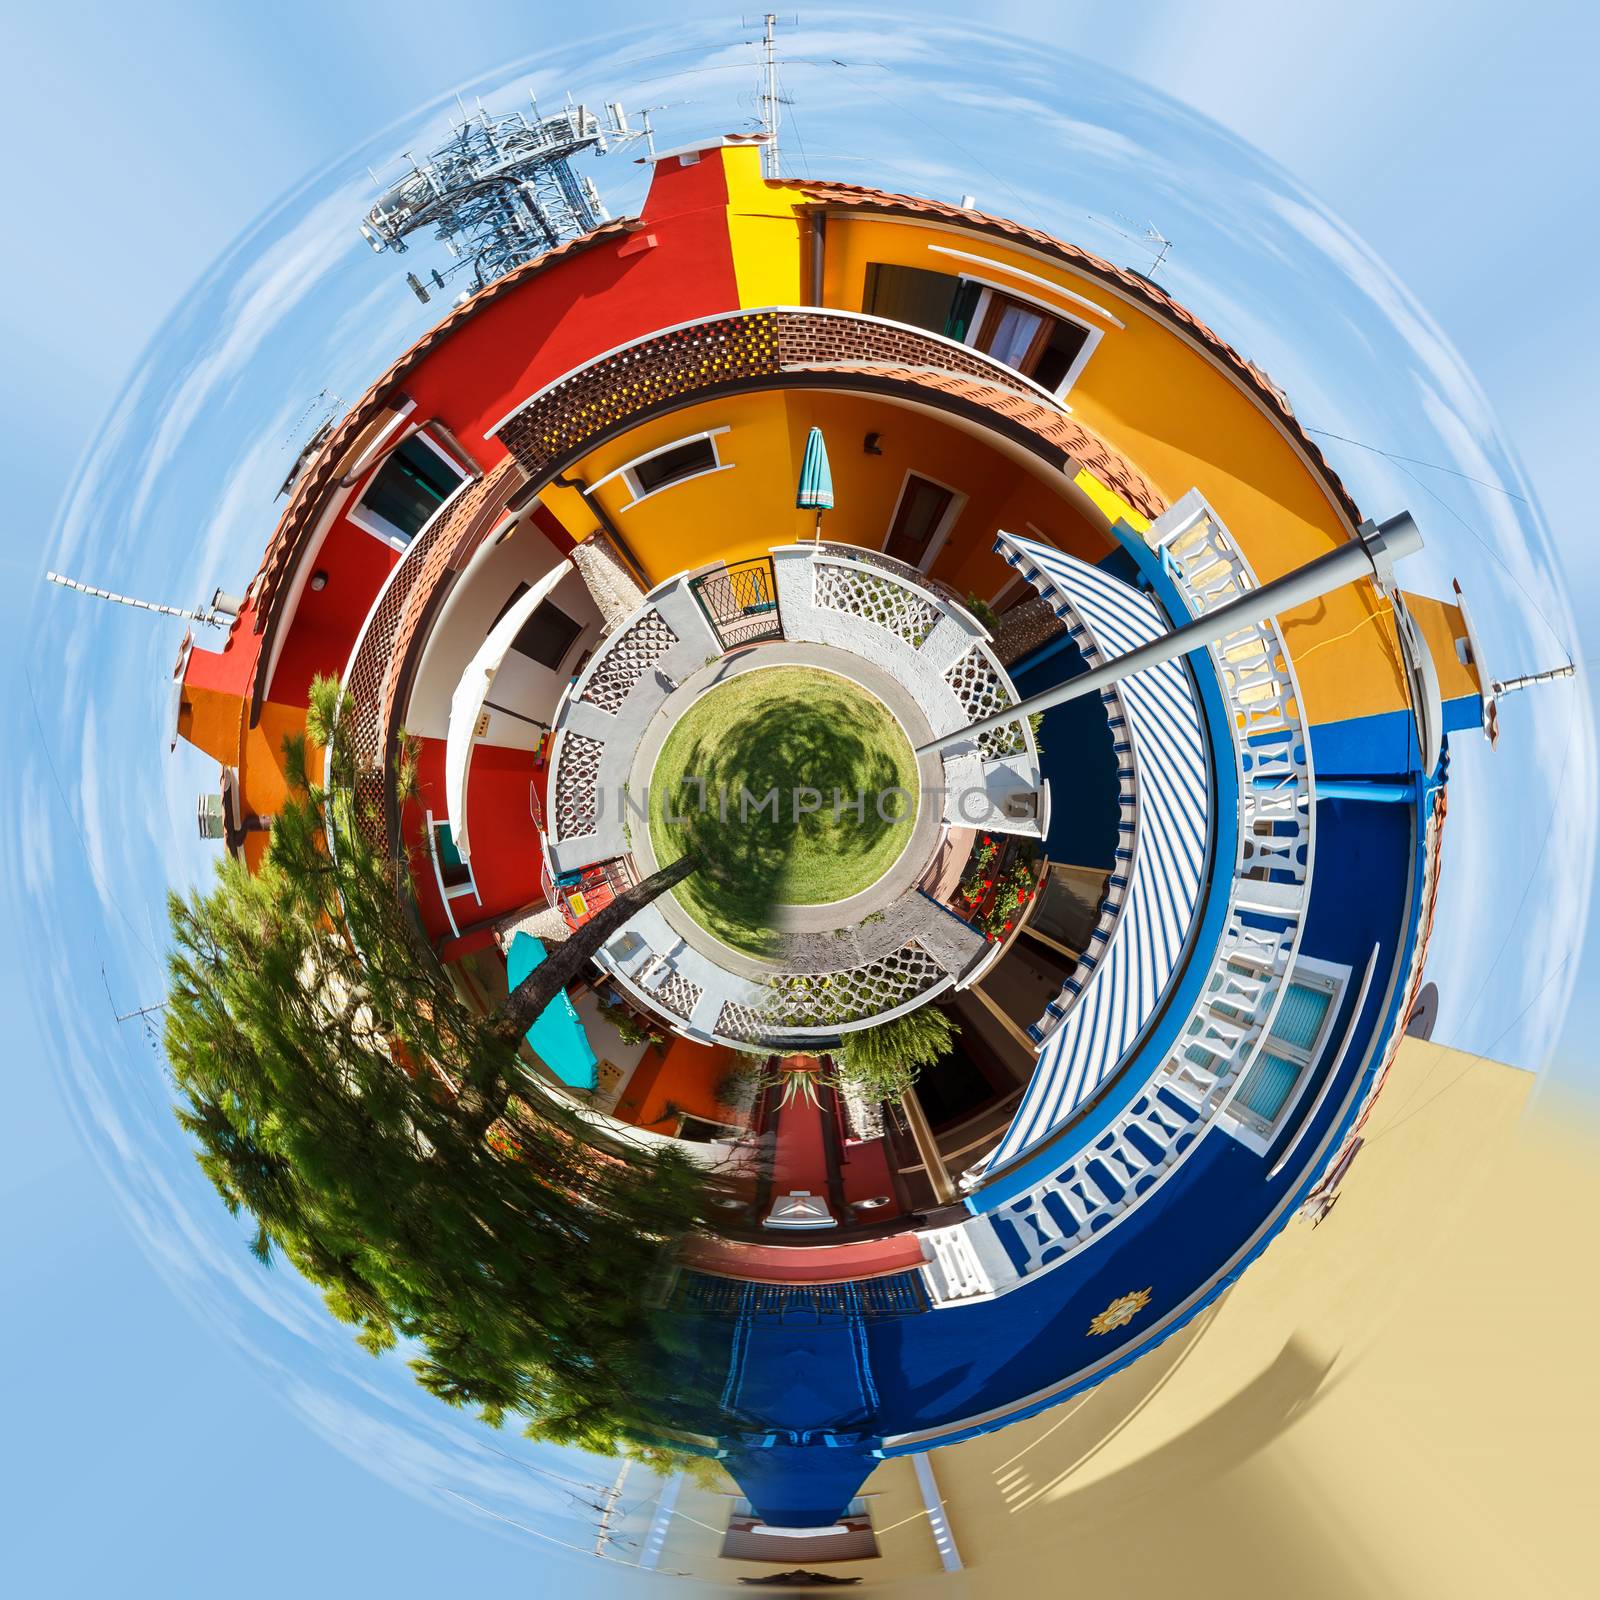 Planet of Colorful buildings in street, Italy, Caorle sunny day. Little planet concept. Tiny green projection 